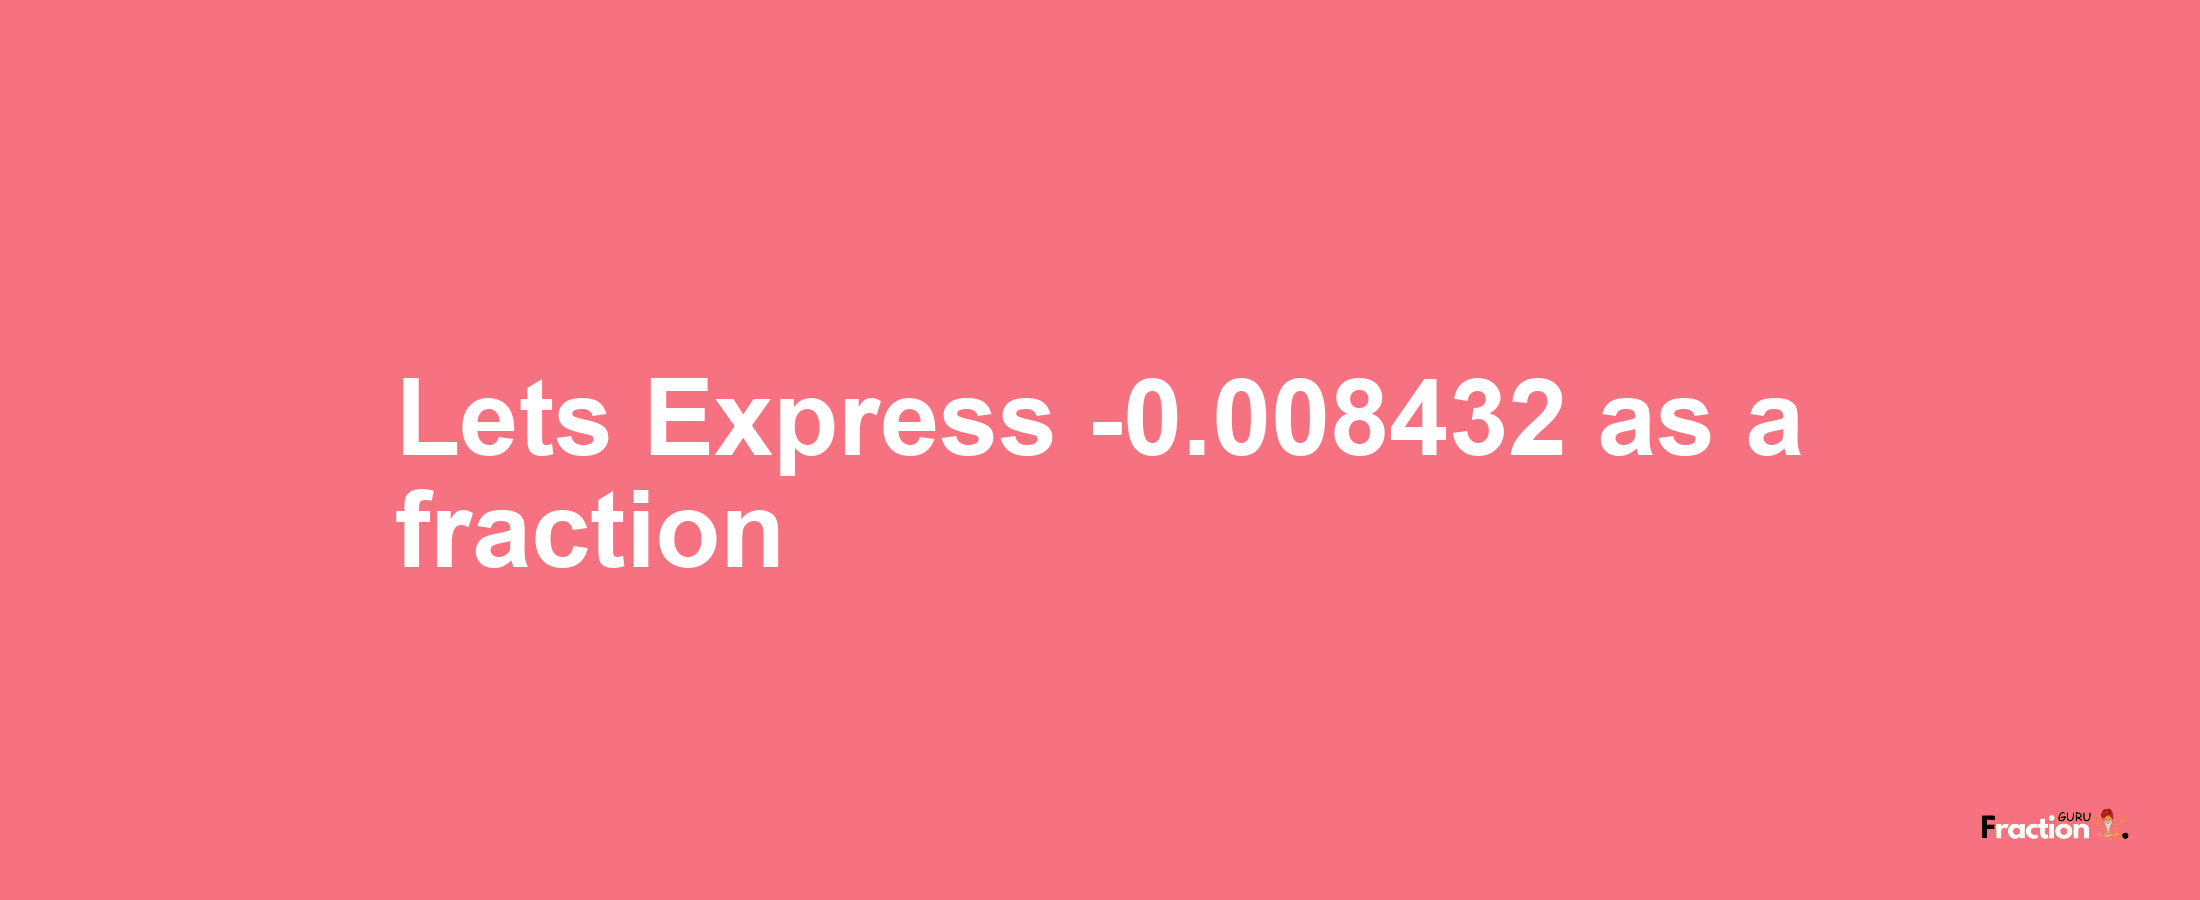 Lets Express -0.008432 as afraction